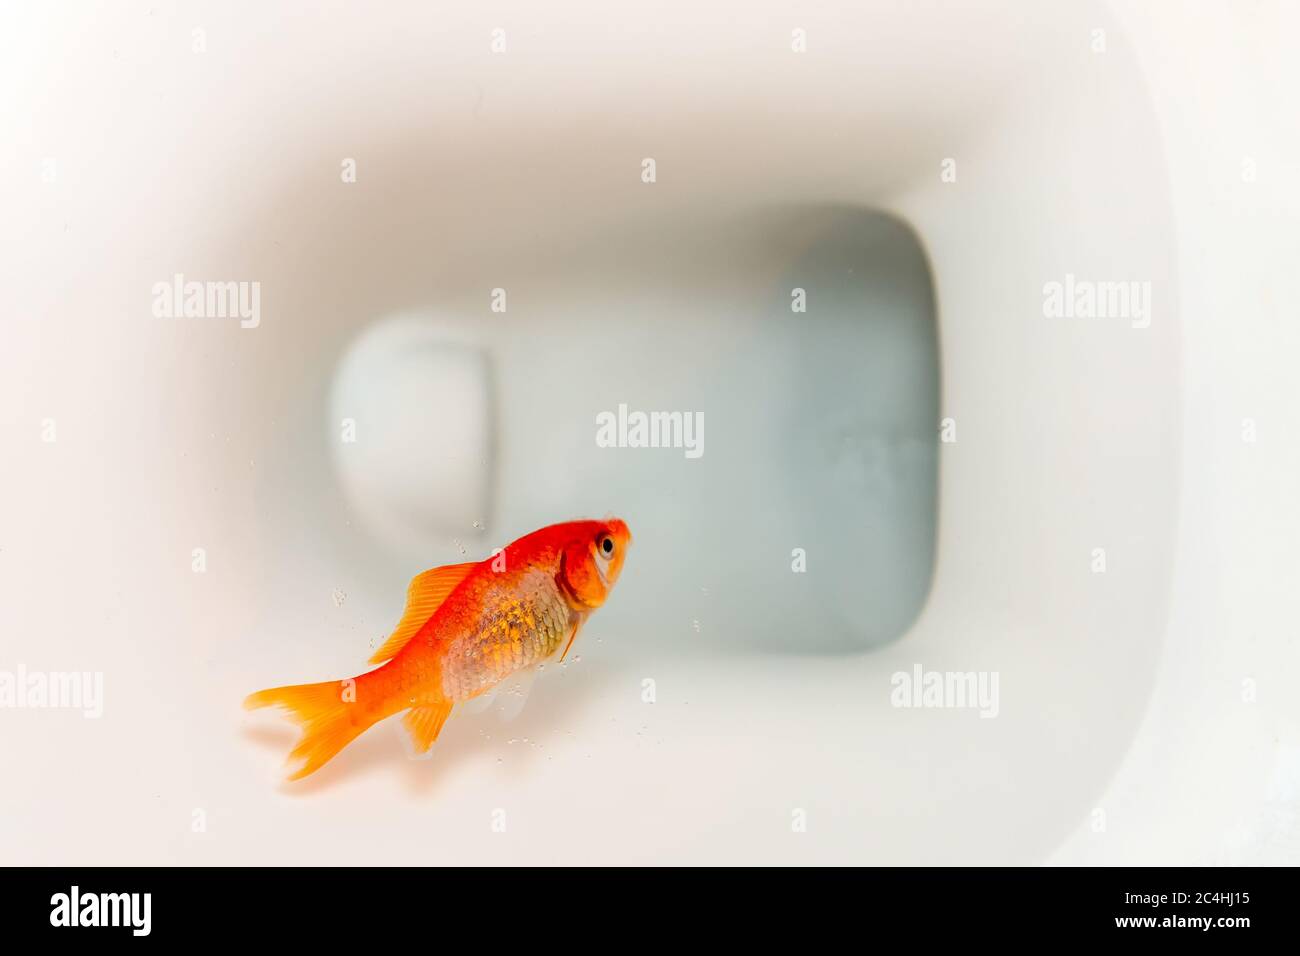 A dead goldfish floating in a toilet. Closeup view. Stock Photo